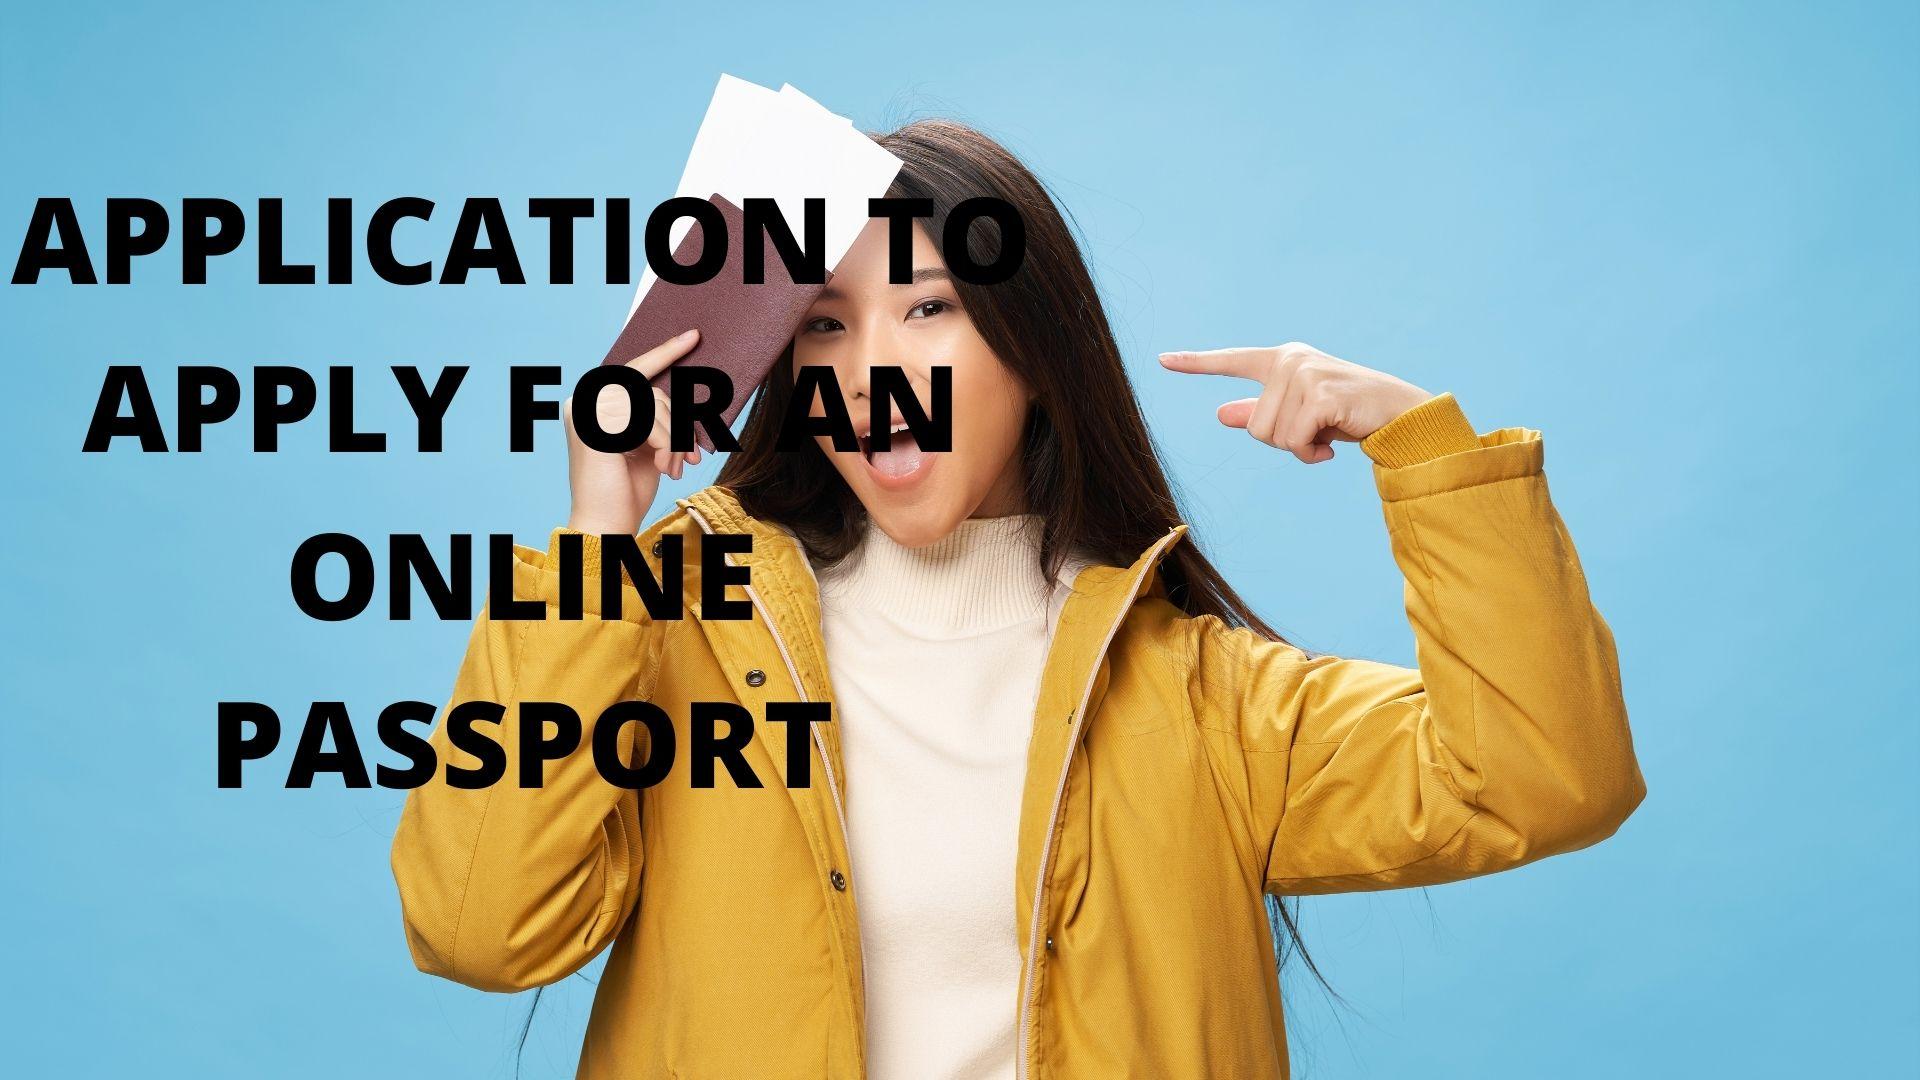 APPLICATION TO APPLY FOR AN ONLINE PASSPORT